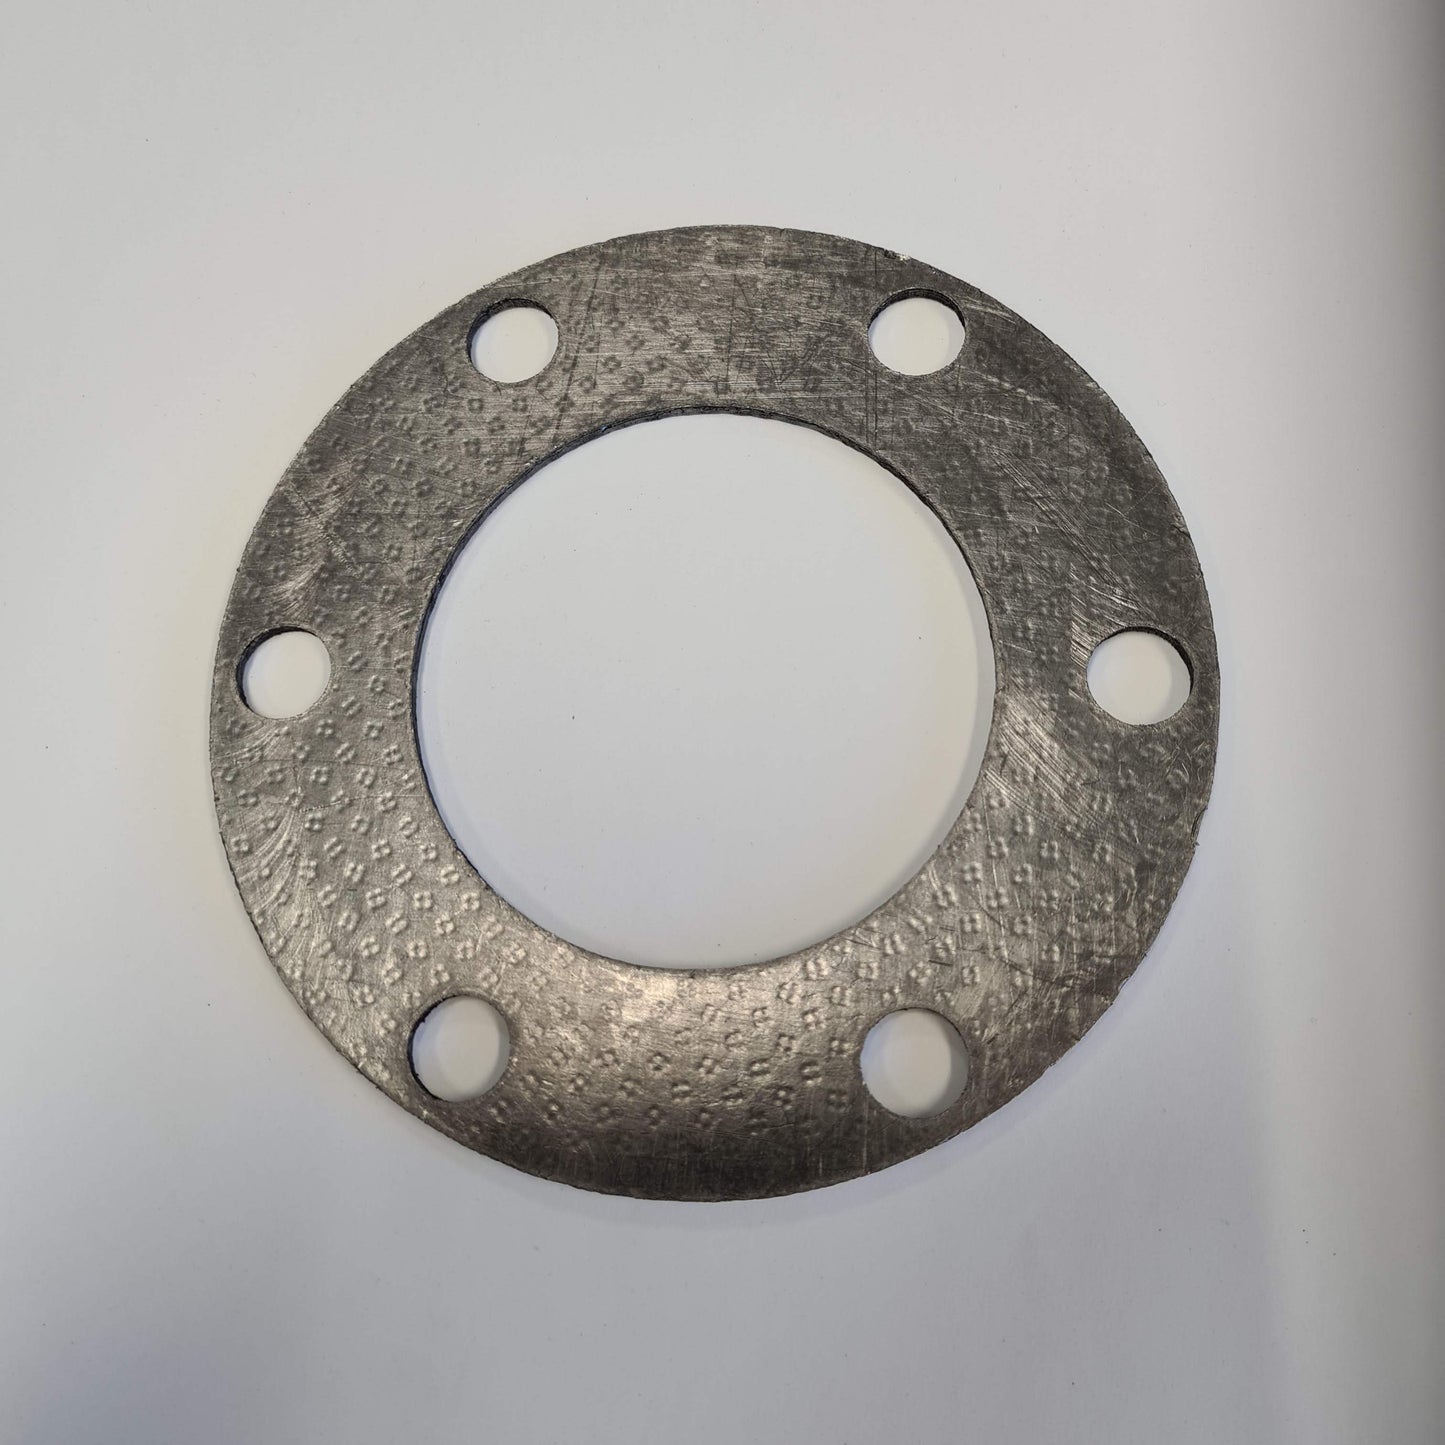 PN14 AS4087 Flange Gaskets 1/2" to 12" 15NB to 300NB